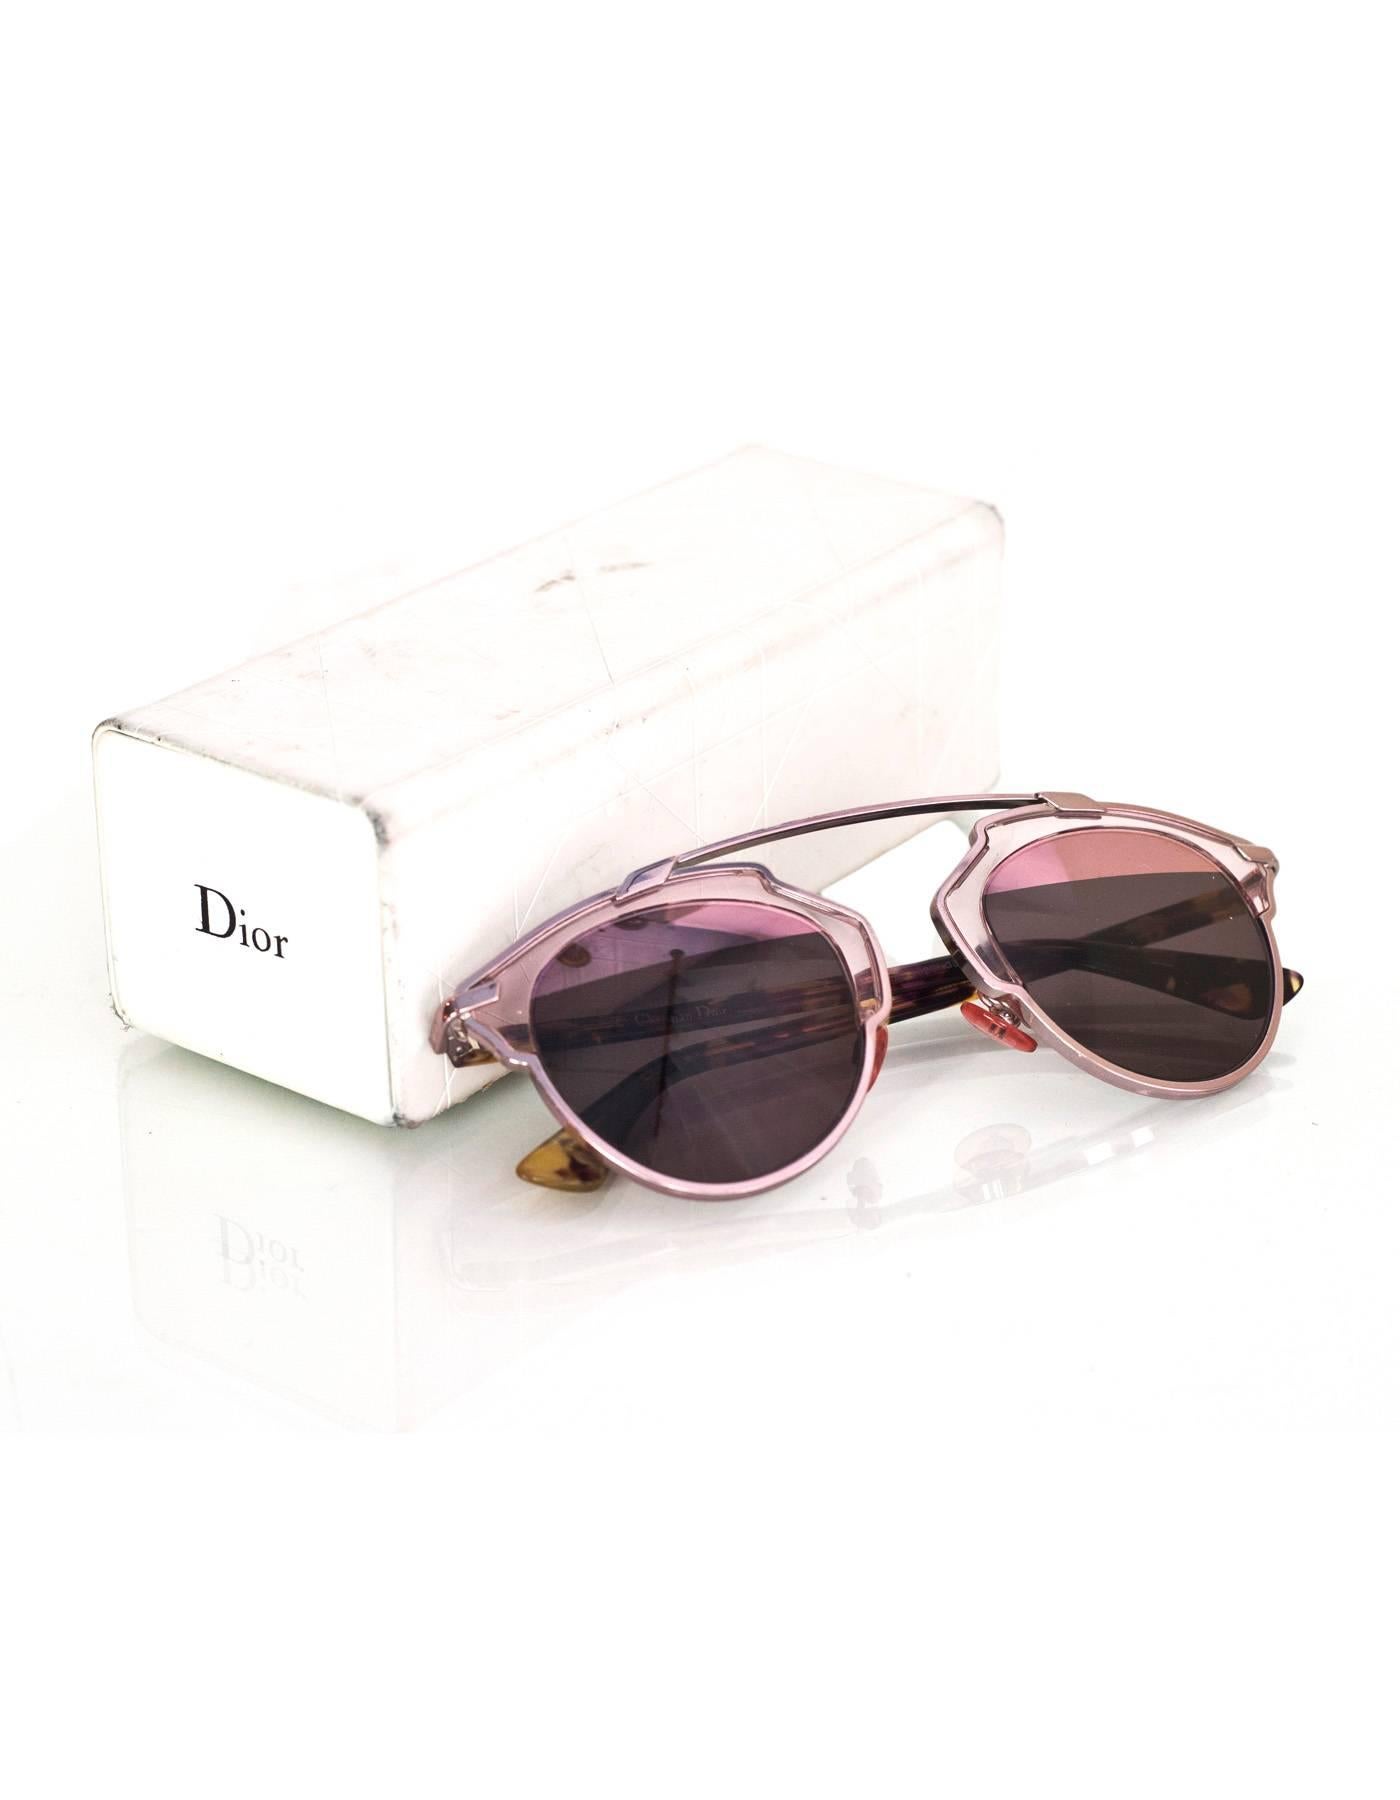 Christian Dior Rose Gold So Real Sunglasses with Case 1